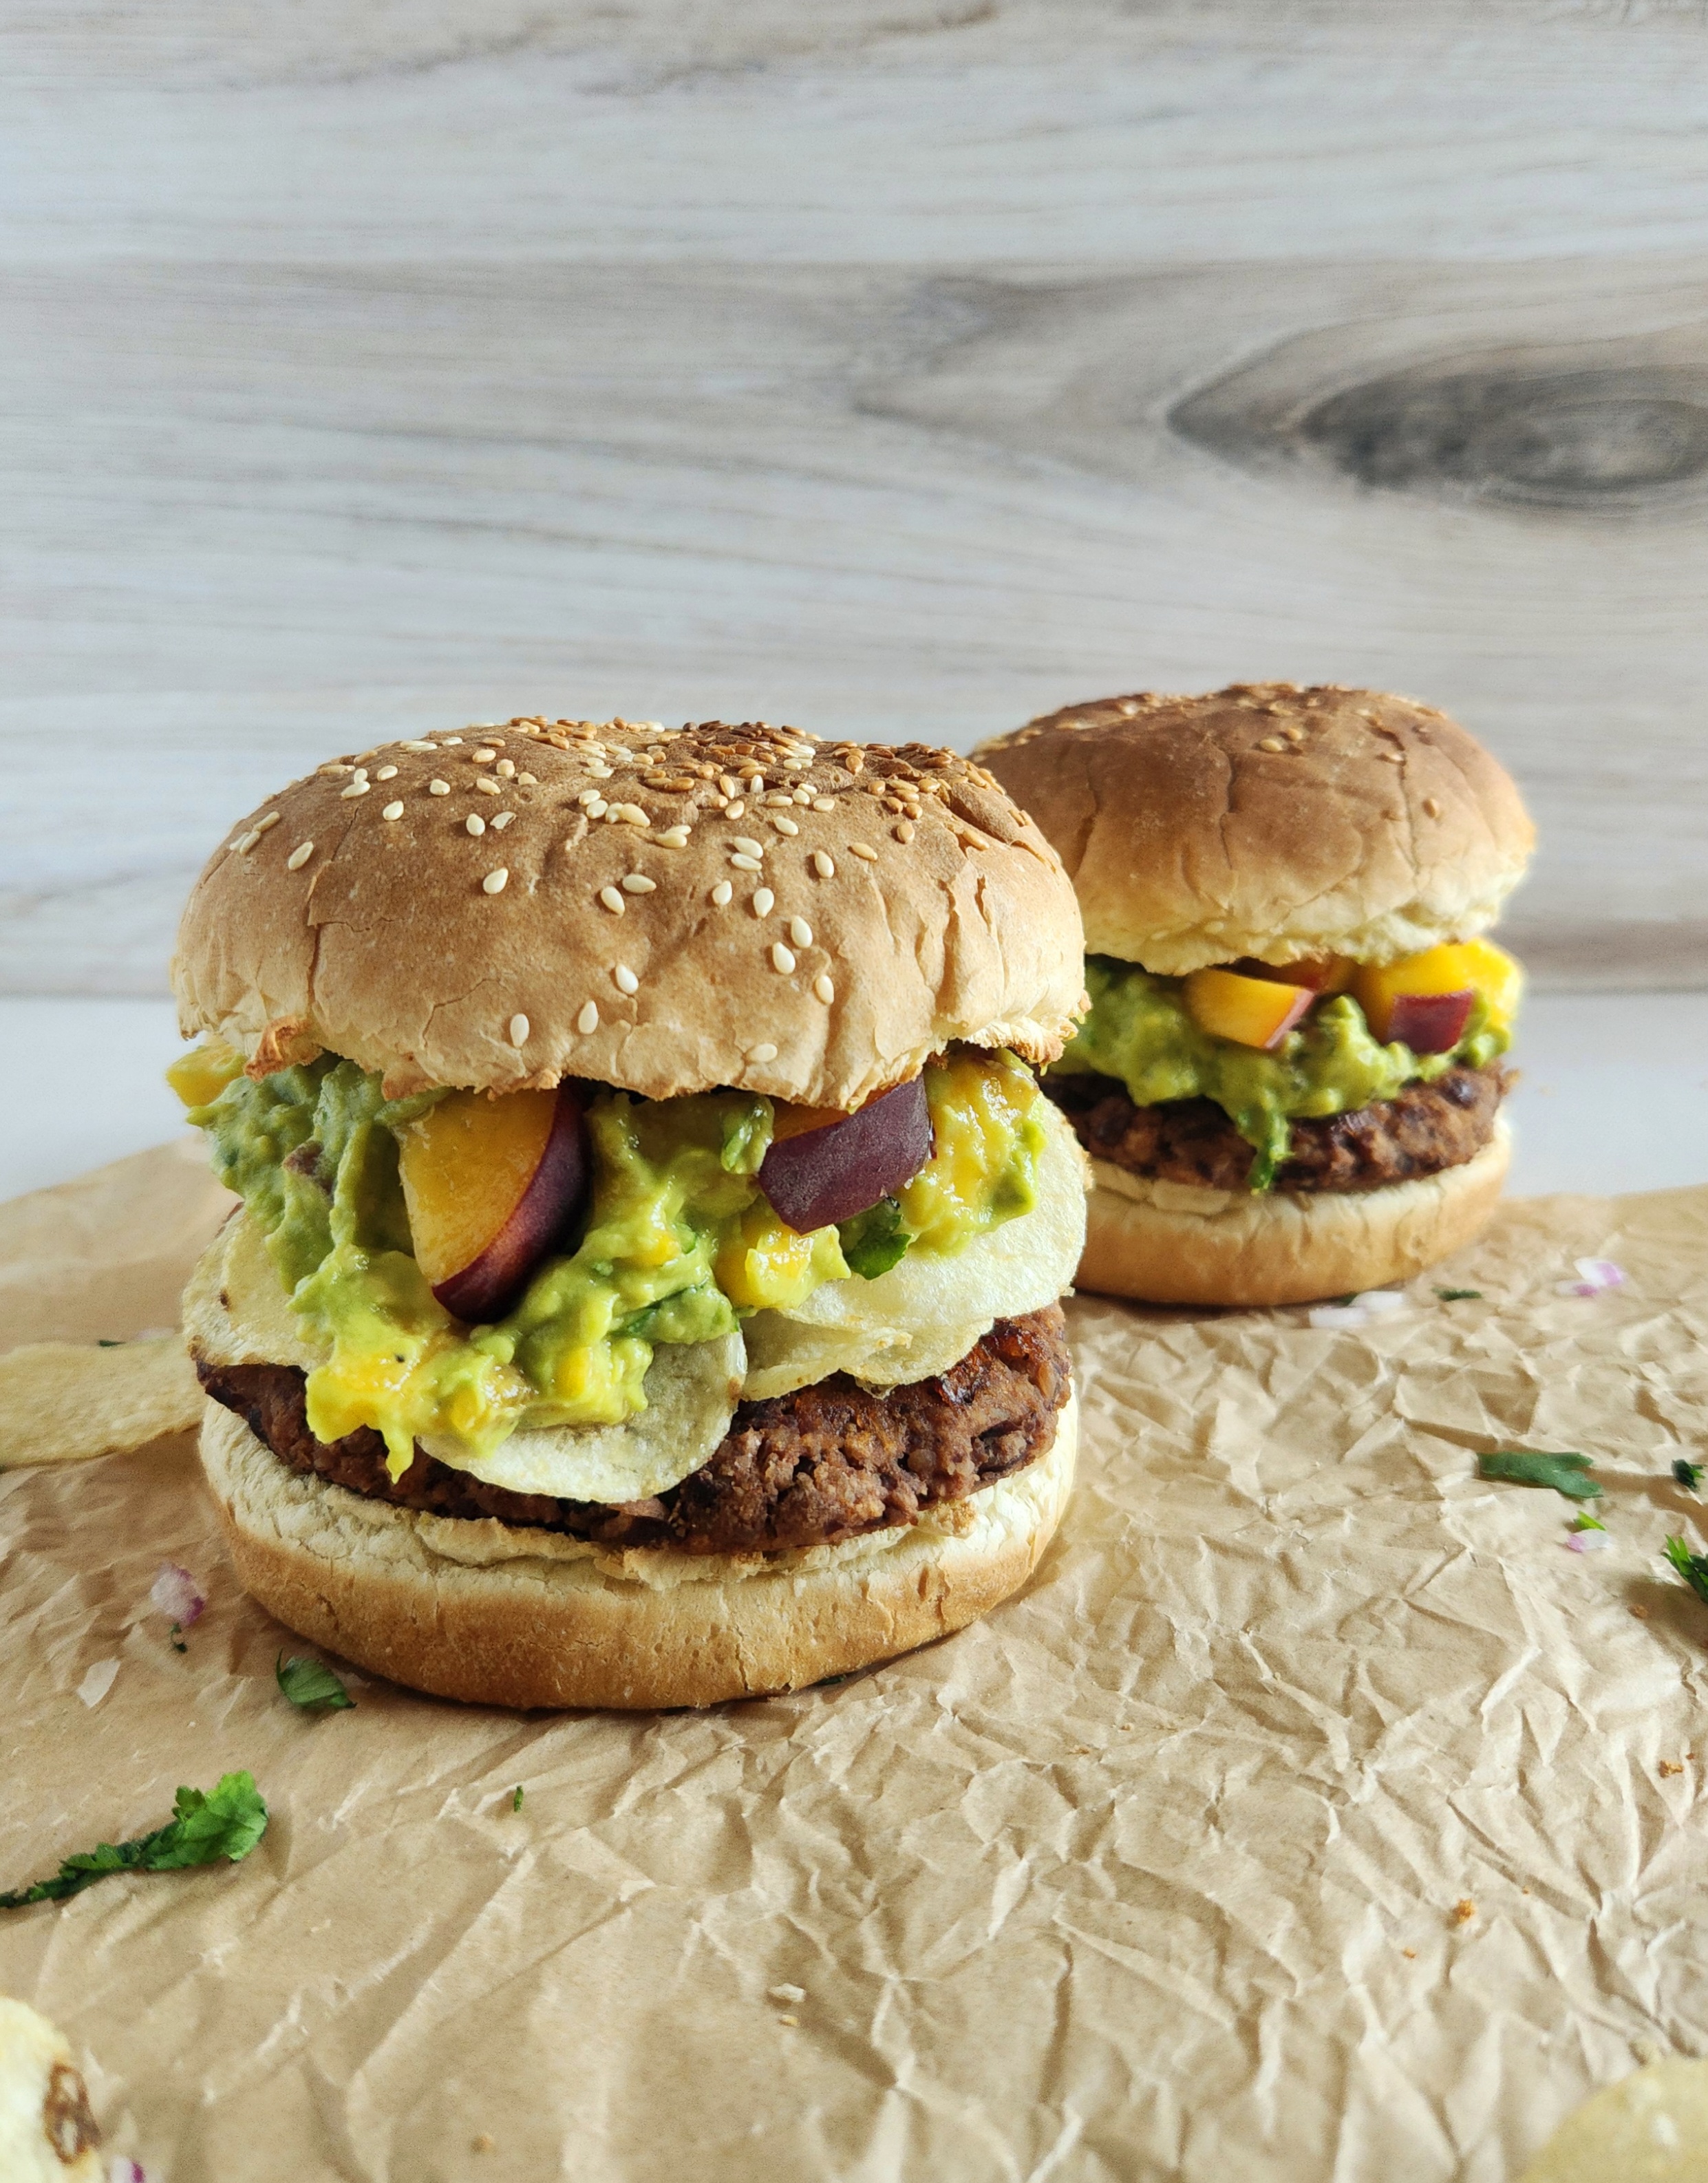 Quick and Easy Black Bean Burgers with Peach Guacamole (Recipe Inspired by BEST SERVED HOT)